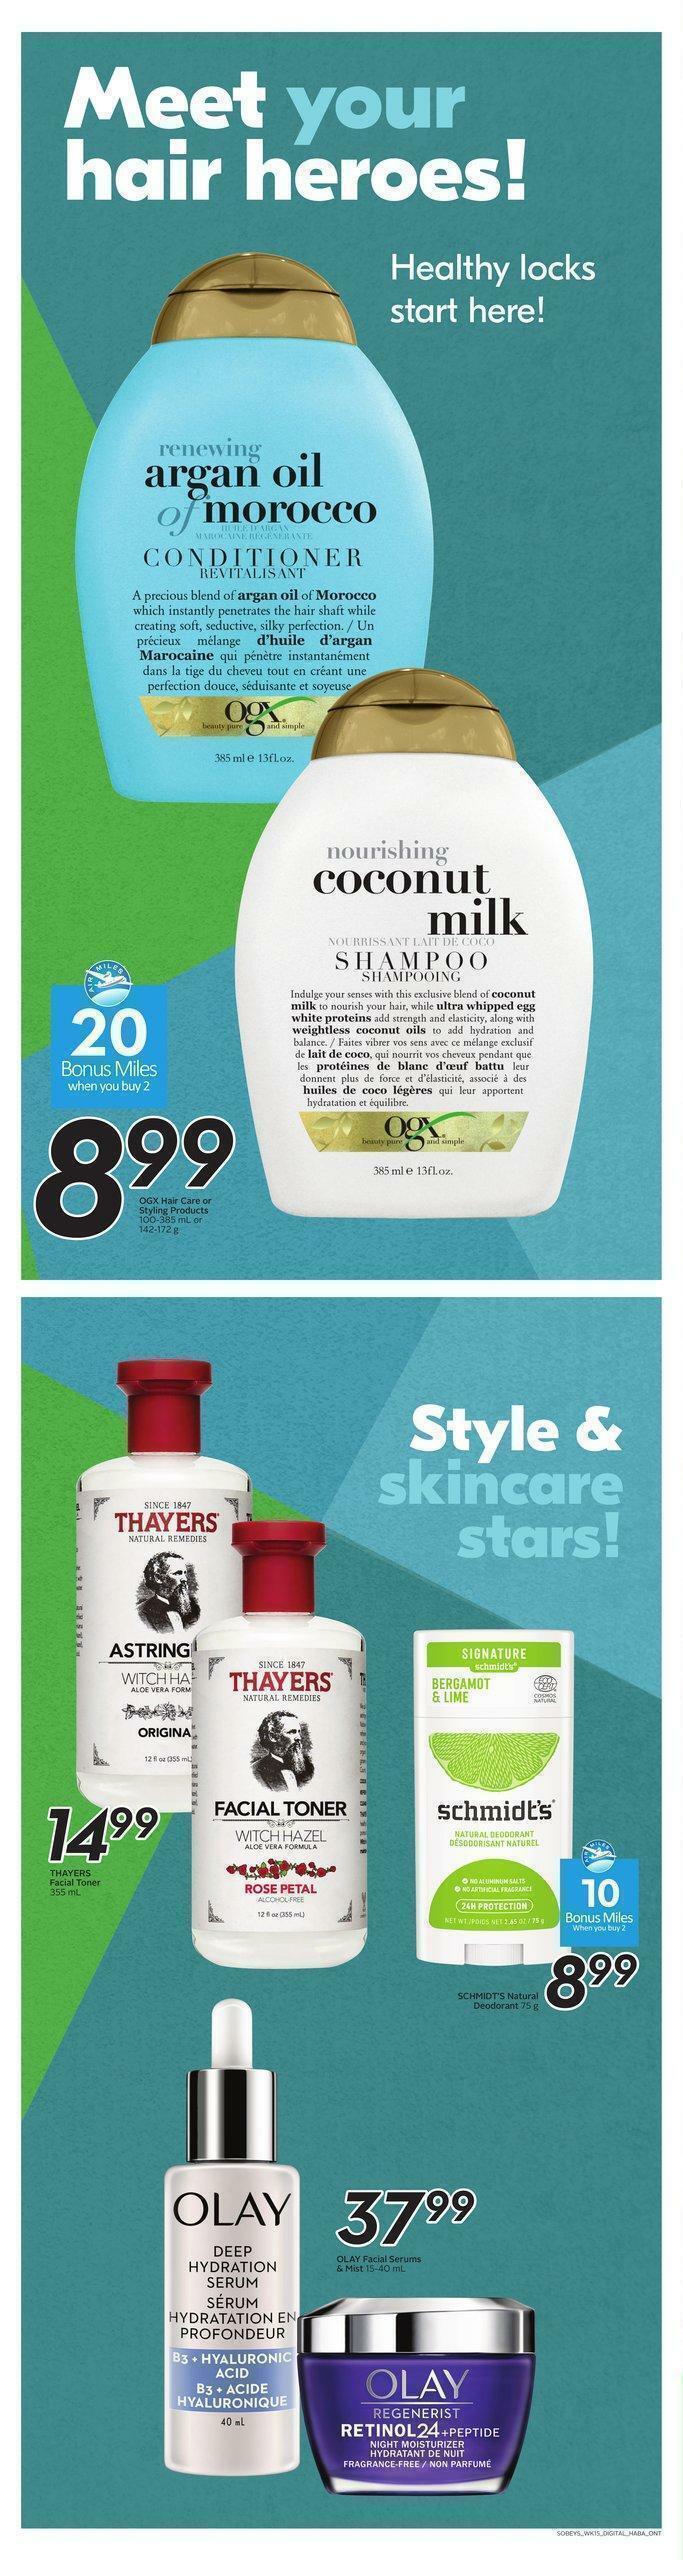 Sobeys Flyer from August 5